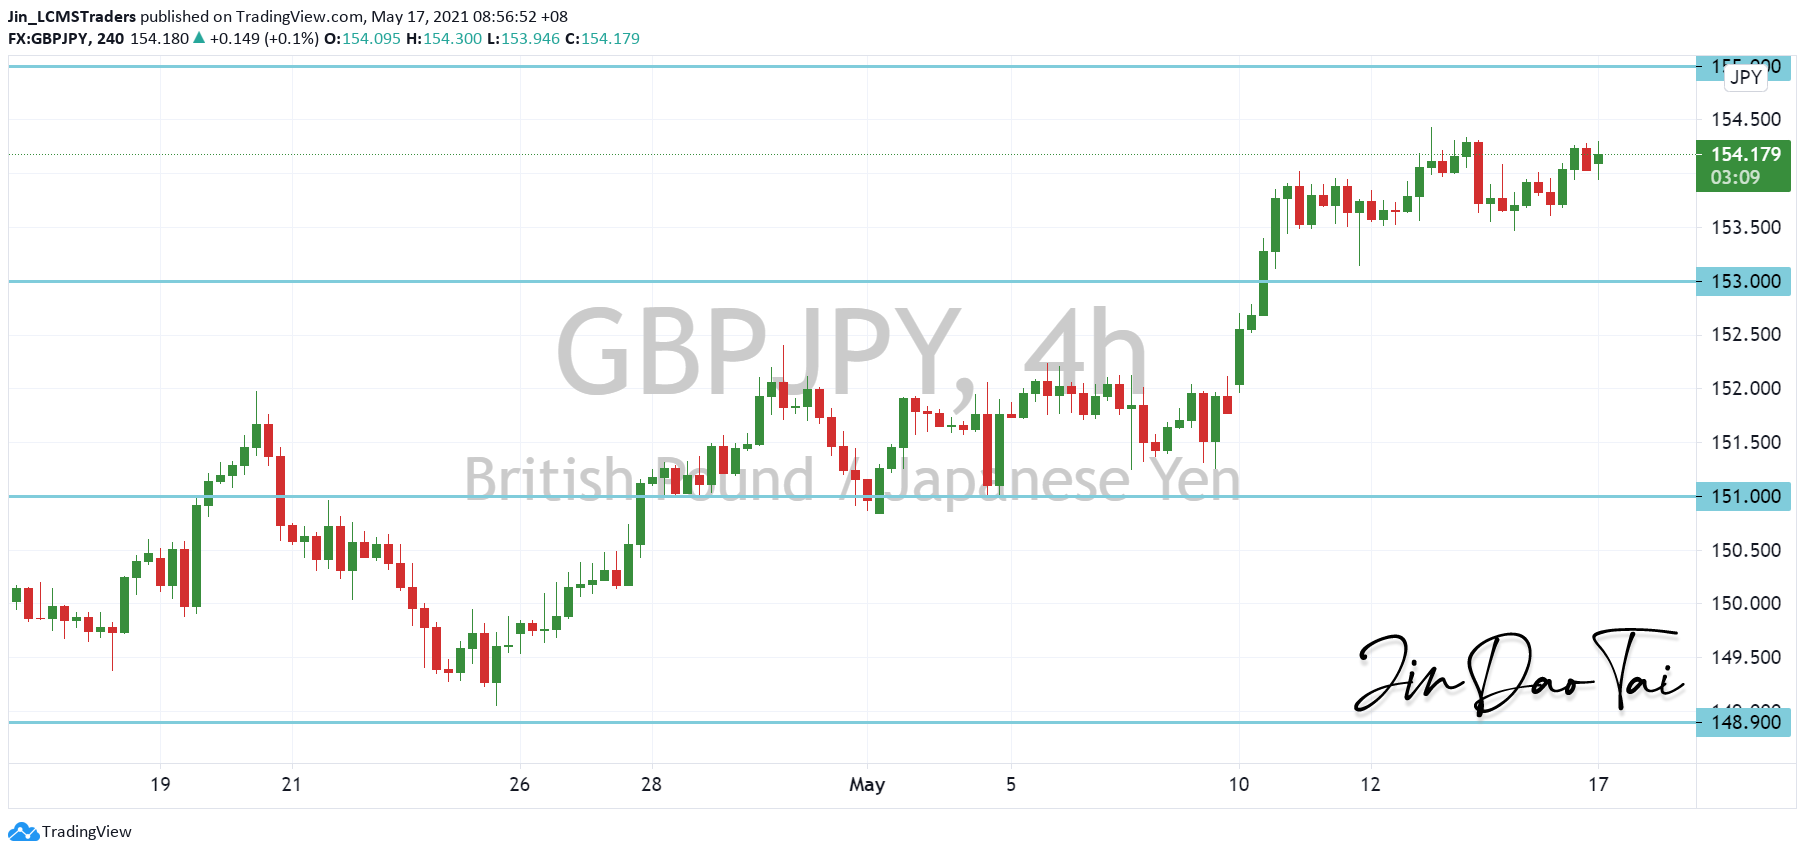 GBP/JPY Outlook (17 May 2021)